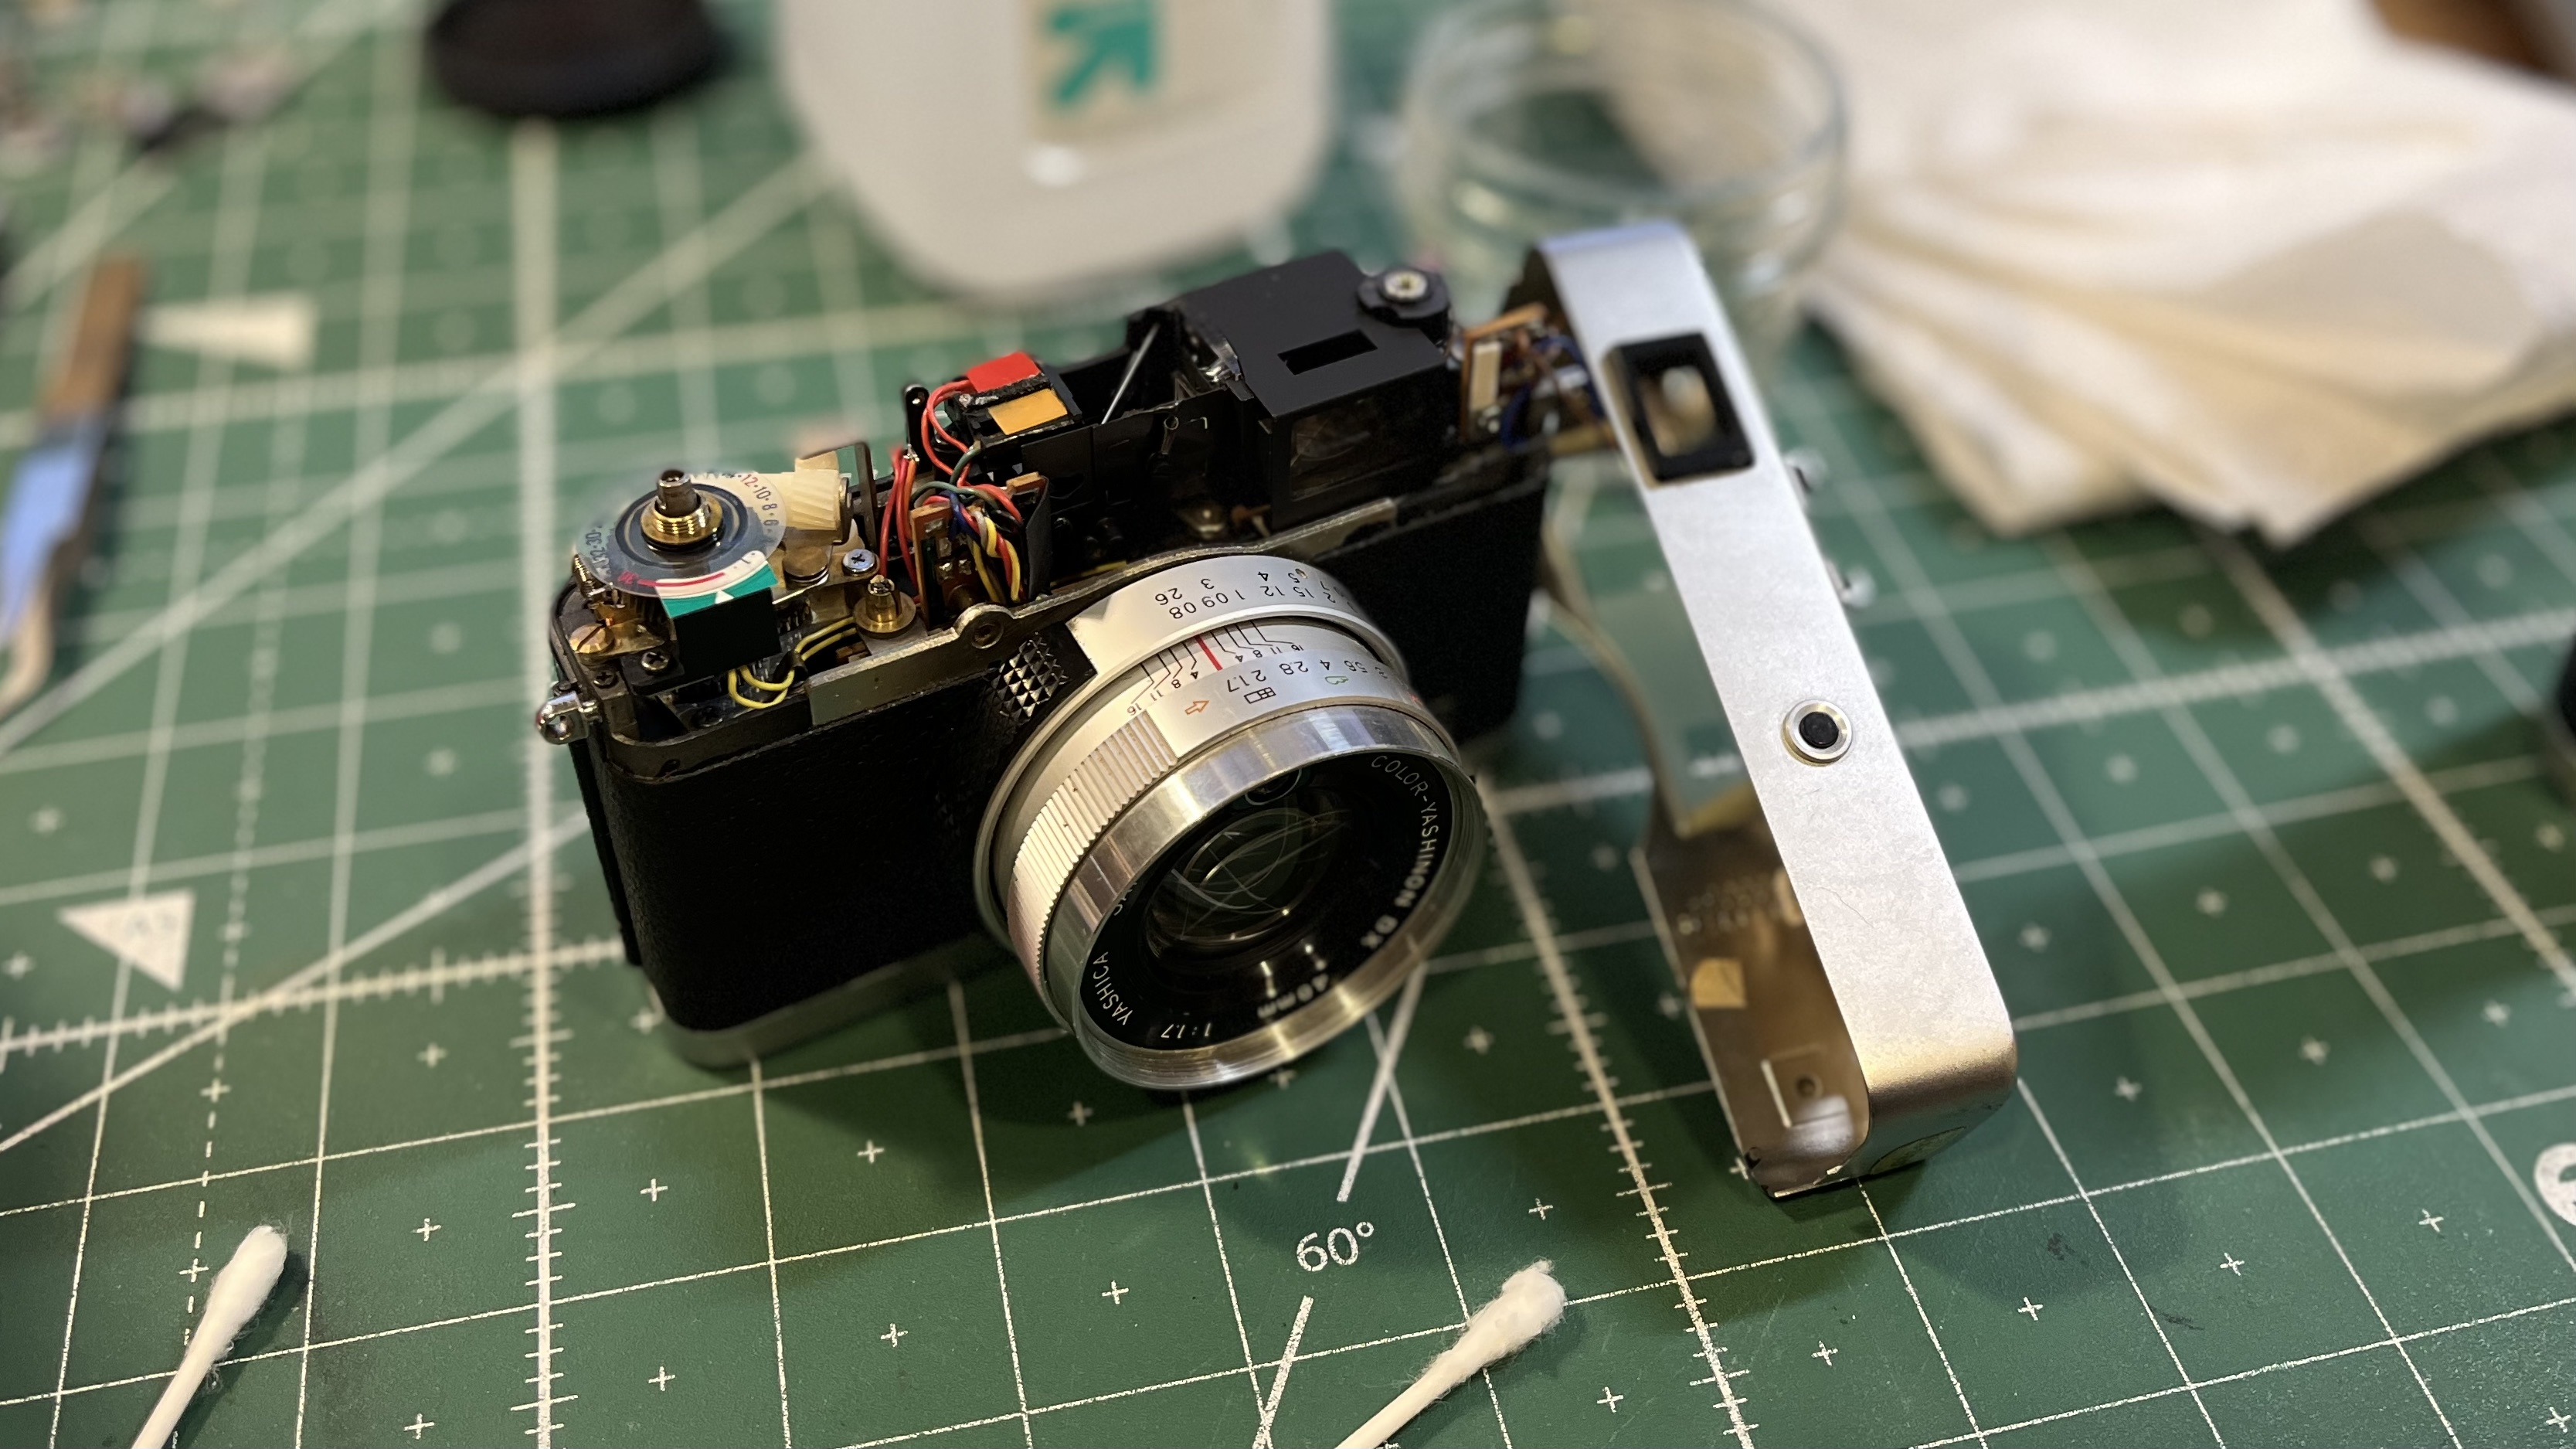 I recently found a Yashica Electro 35 GX in an antique shop in surprisingly good condition!
 Still, it had a fogged up rangefinder patch making focusing difficult.